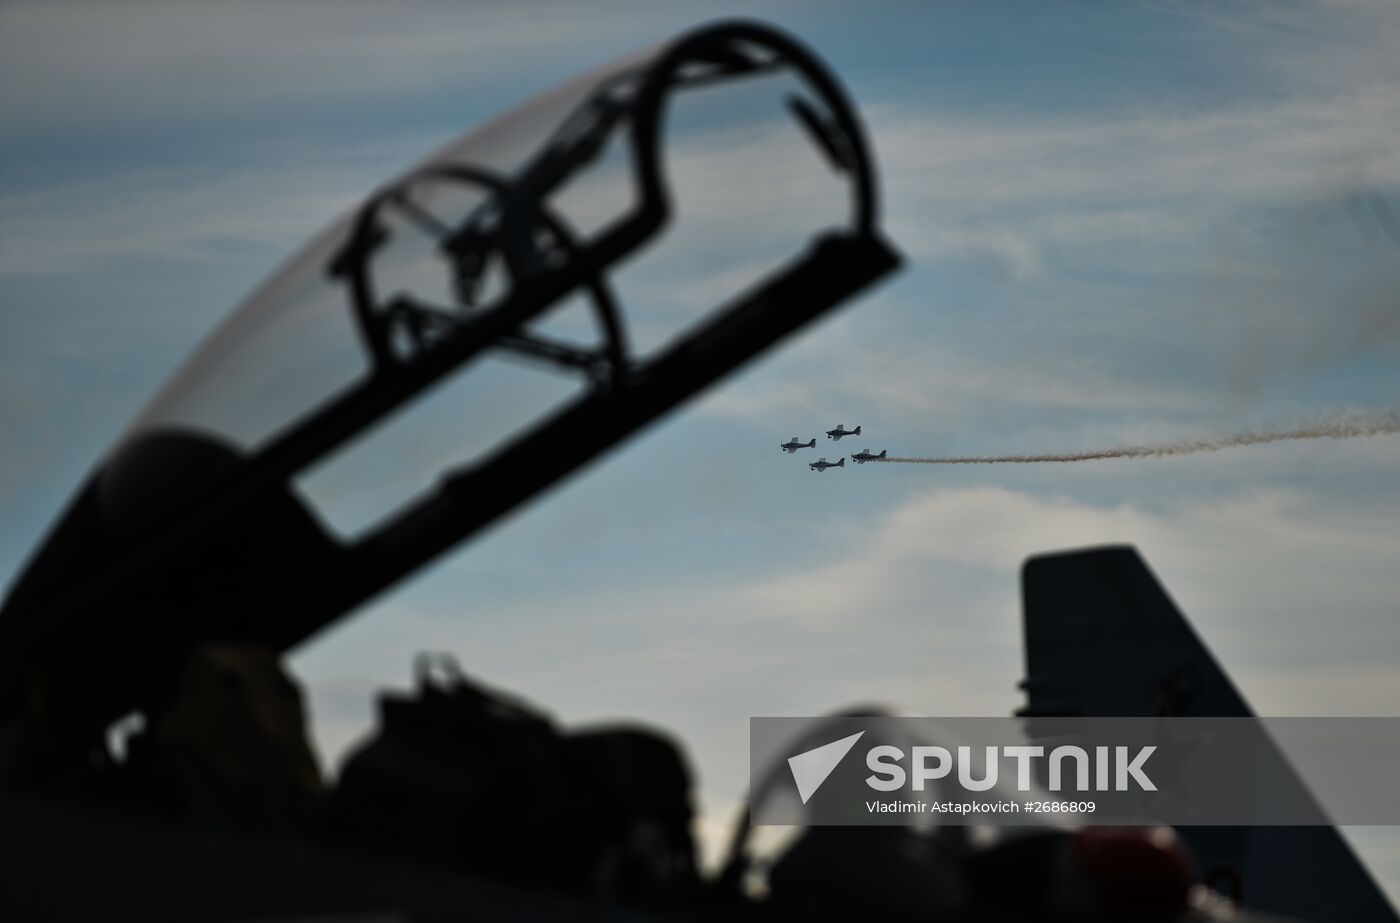 MAKS 2015 International Aviation and Space Salon. Day Four